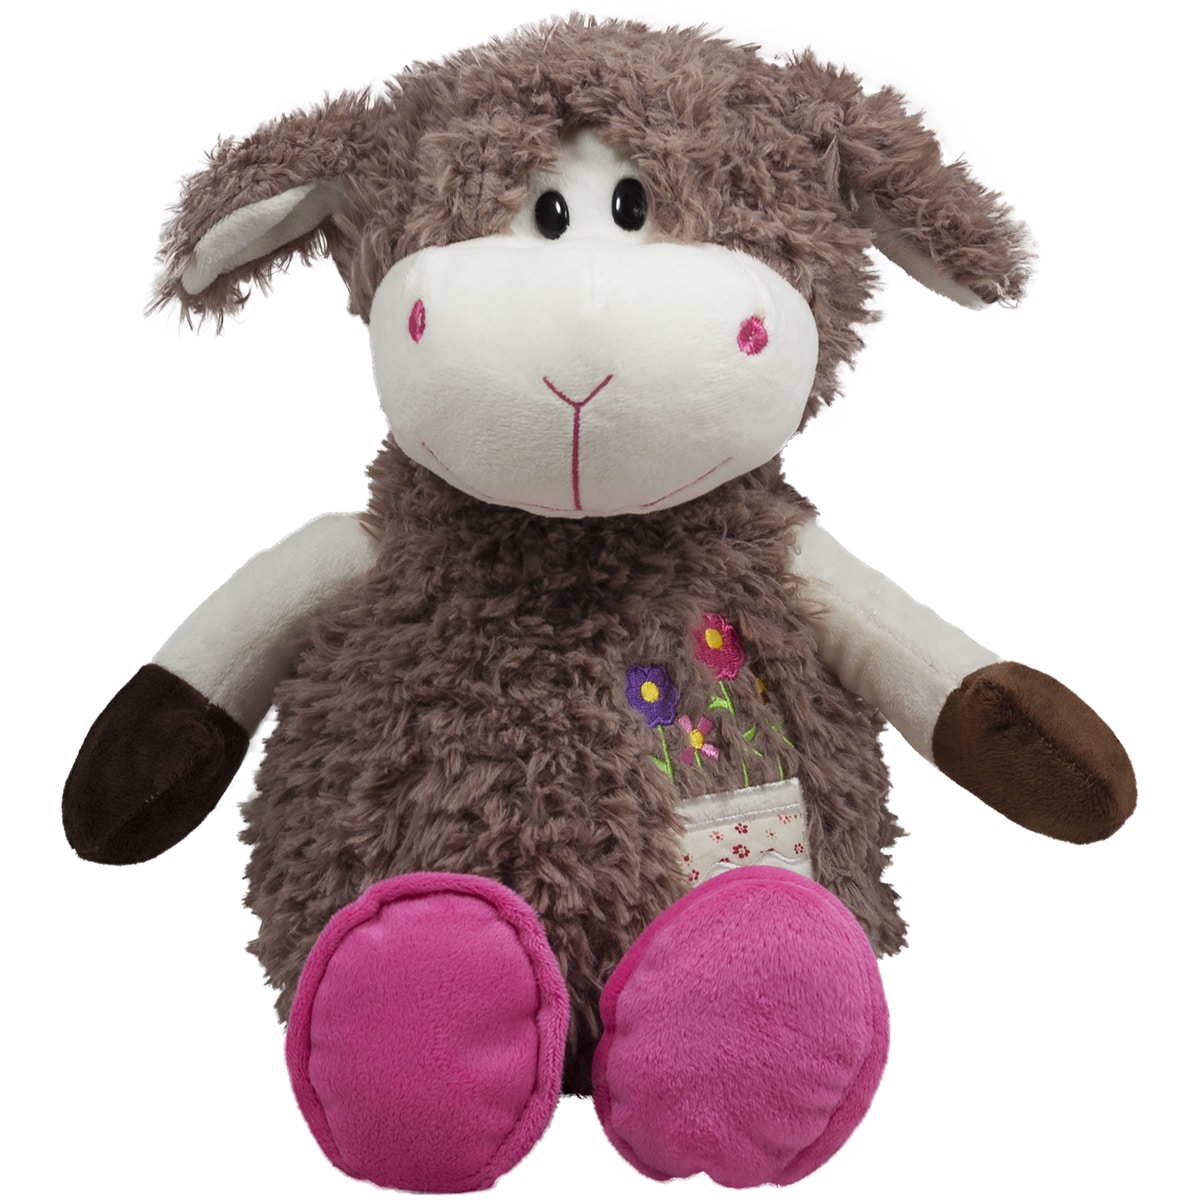 Sheep with pink slippers - Brown